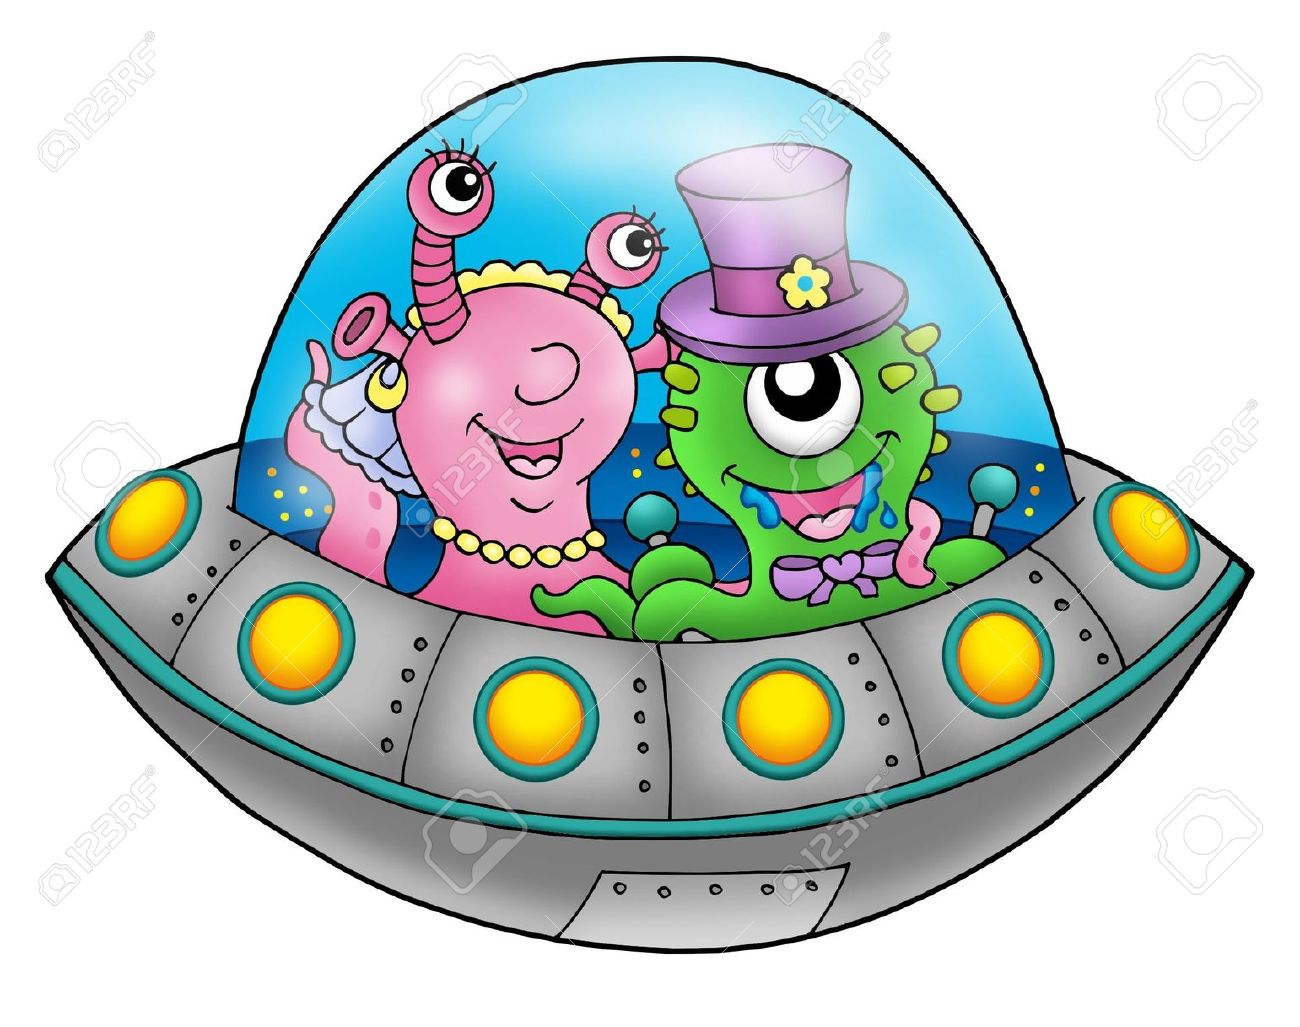 clipart of ufo - photo #48